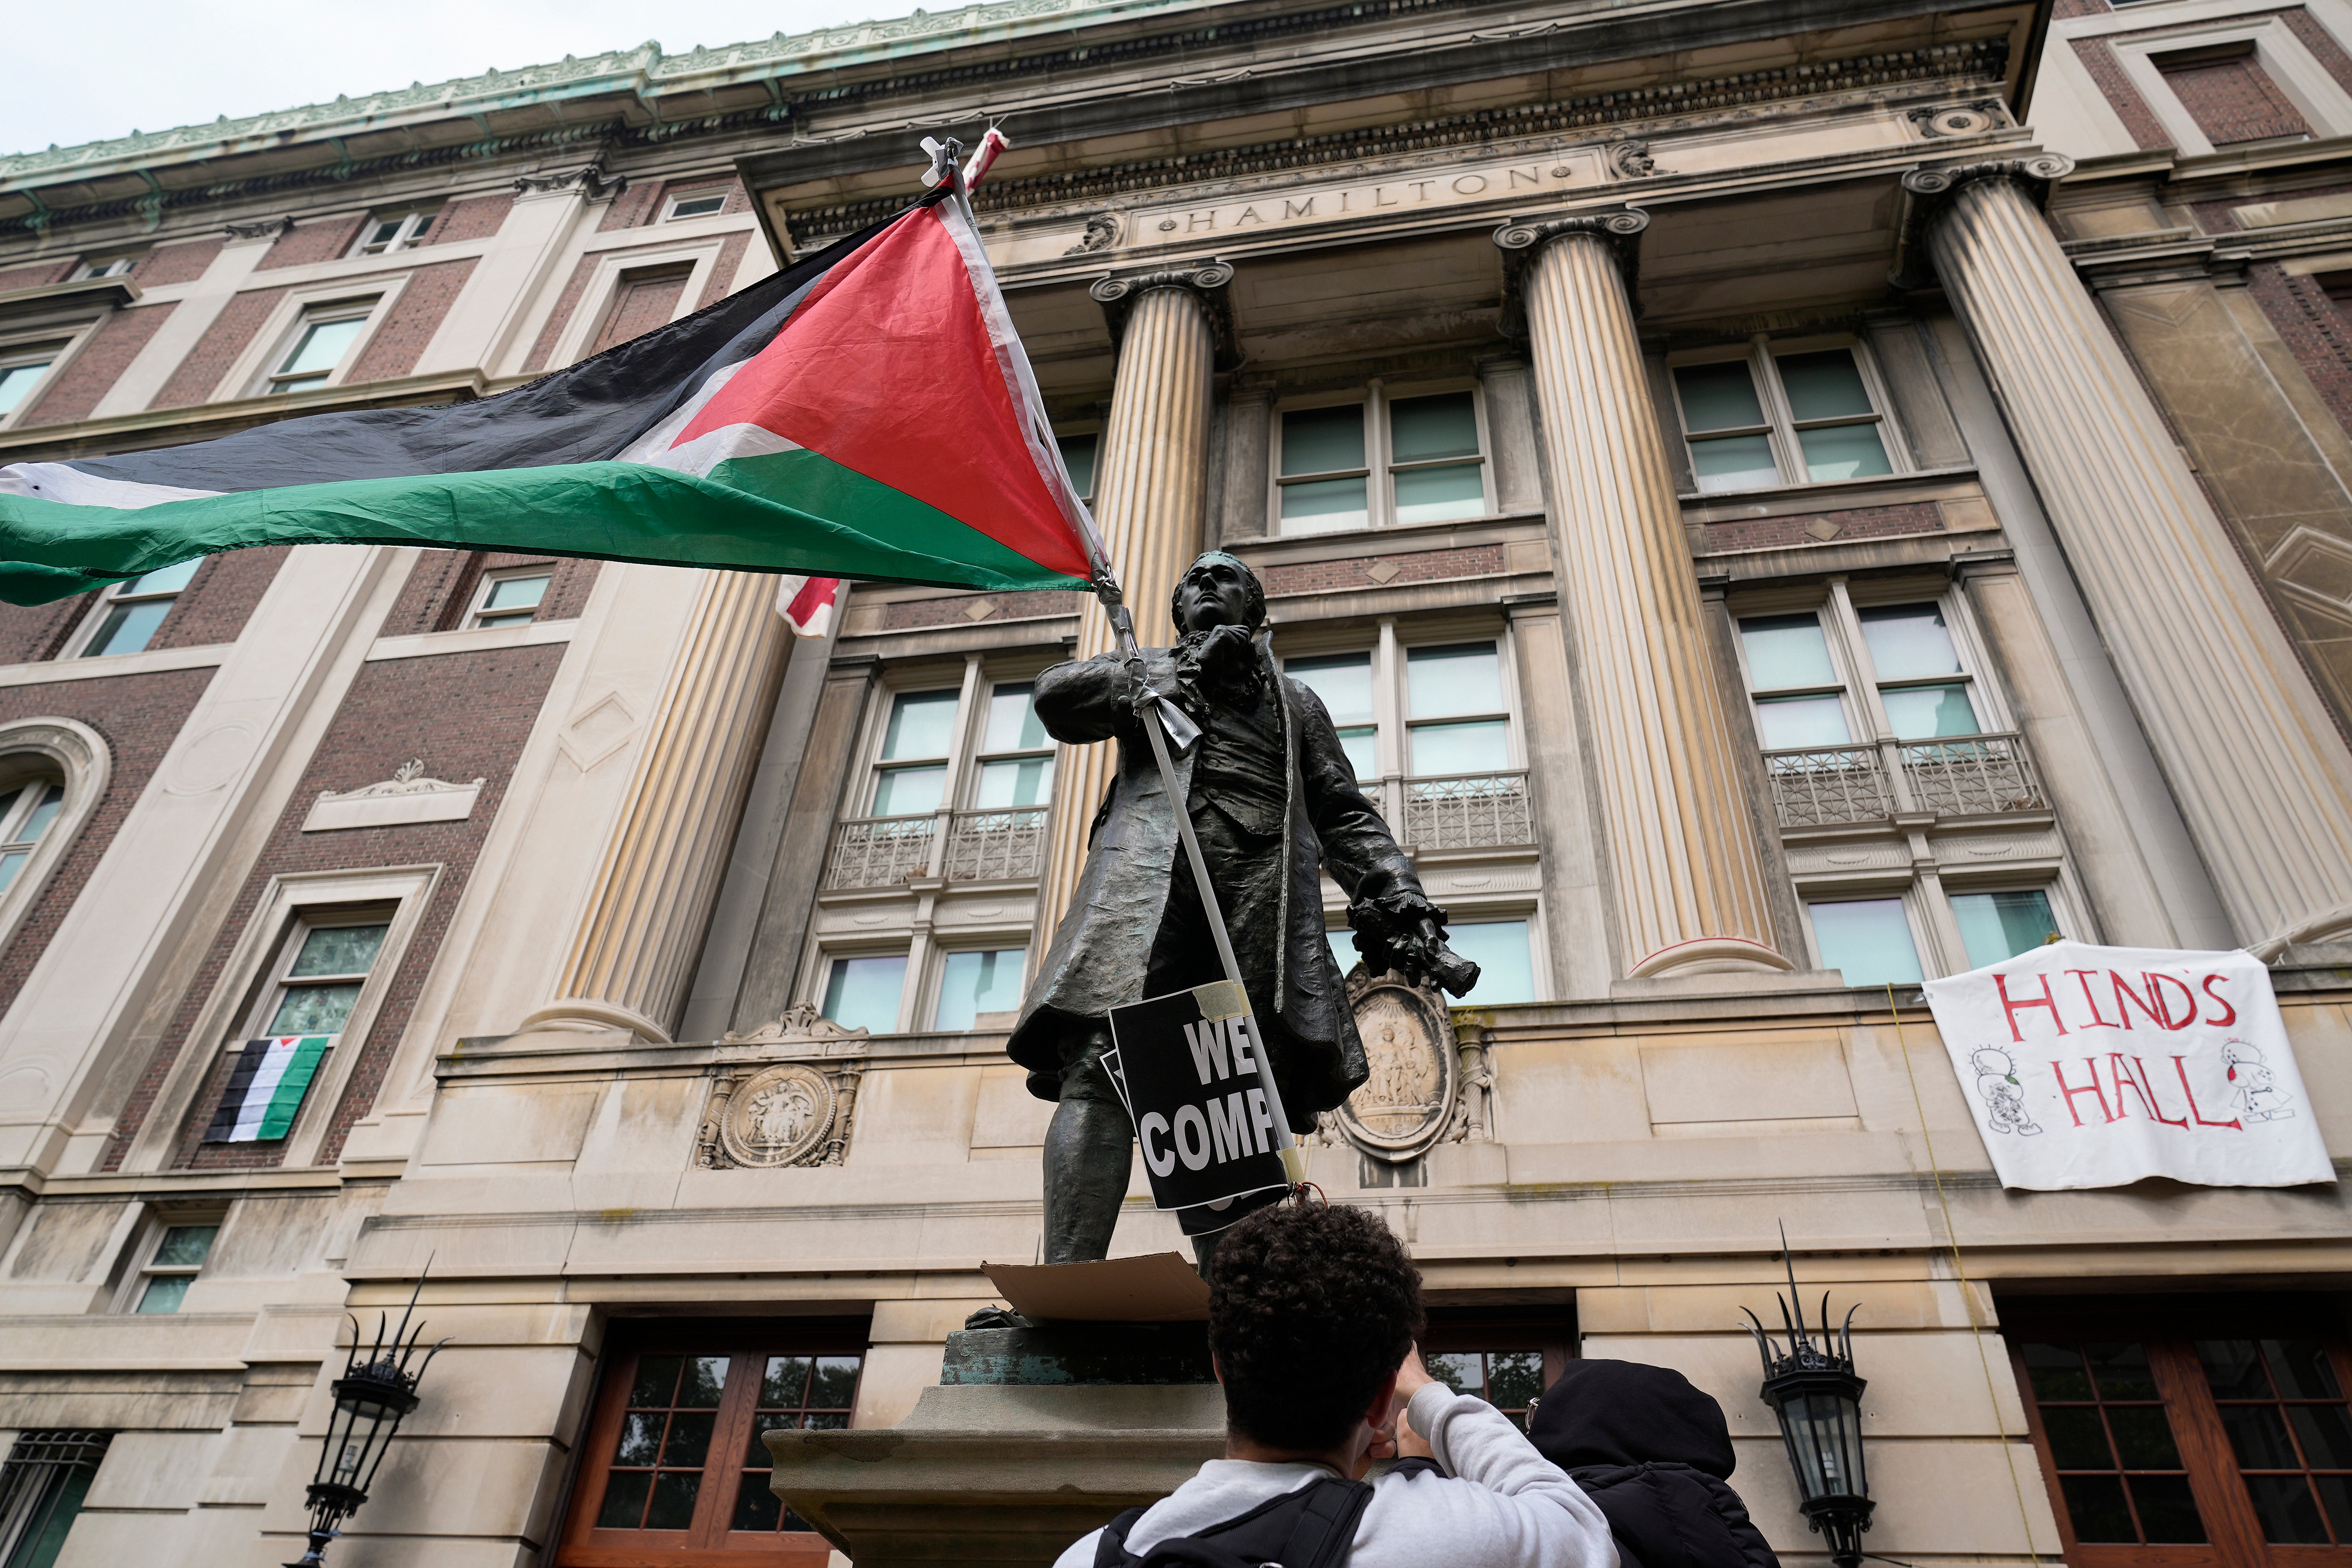 A student protester parades a Palestinian flag outside the entrance to Hamilton Hall. Pro-Palestinian protesters occupied the building on Columbia University’s campus early Tuesday morning